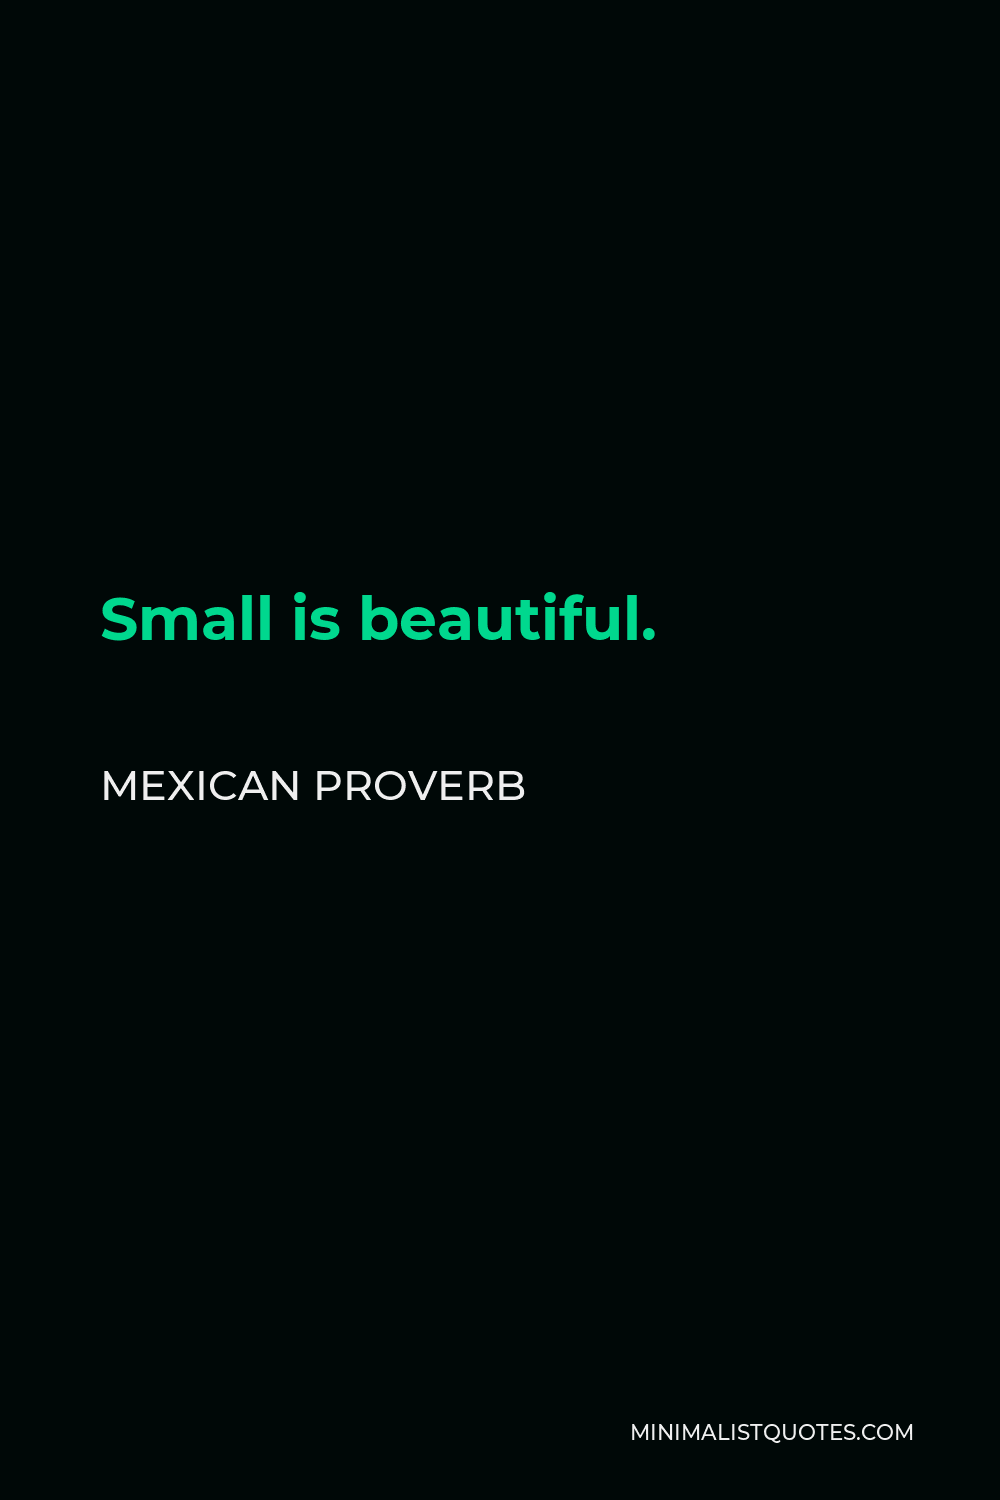 Mexican Proverb Quote - Small is beautiful.